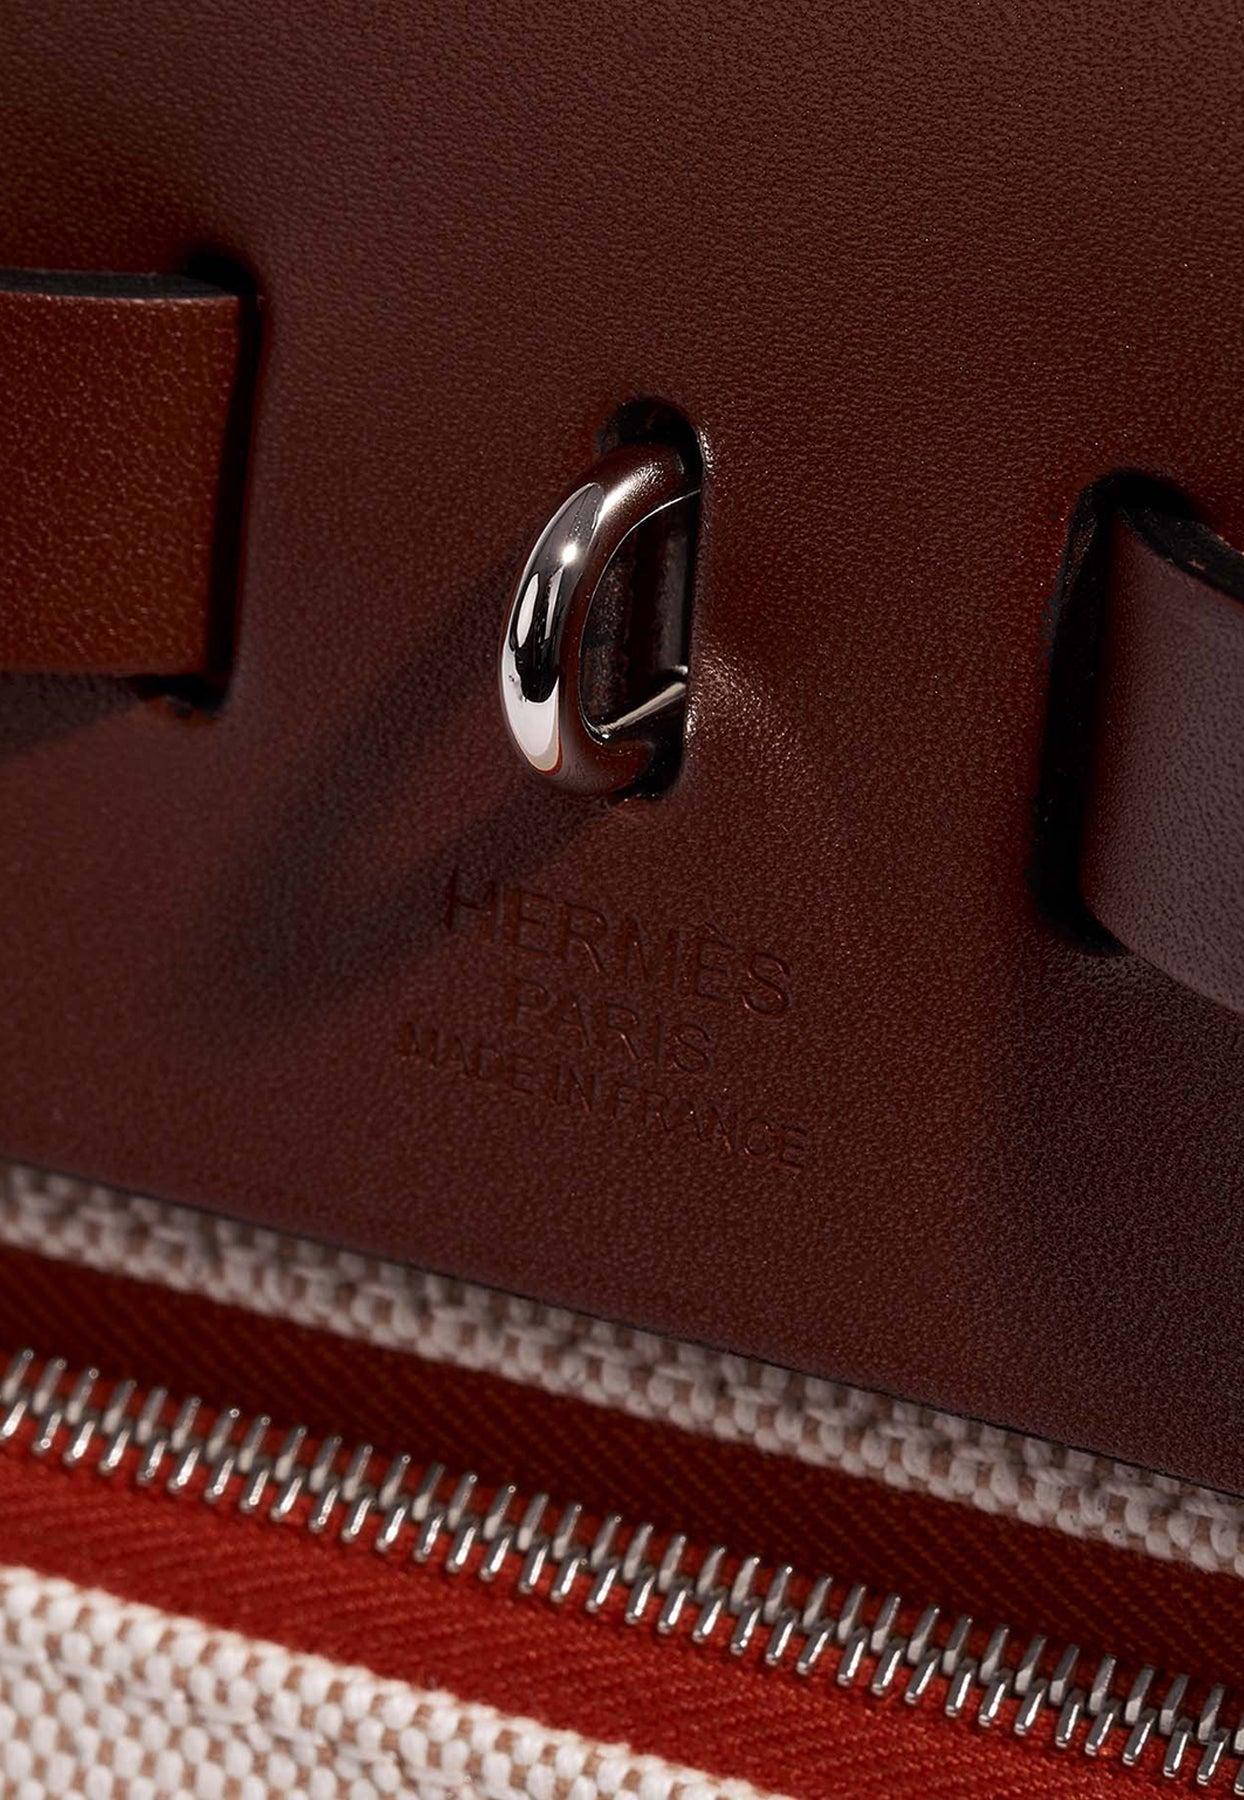 Hermes Herbag Gold with SHW stamp T in 2023